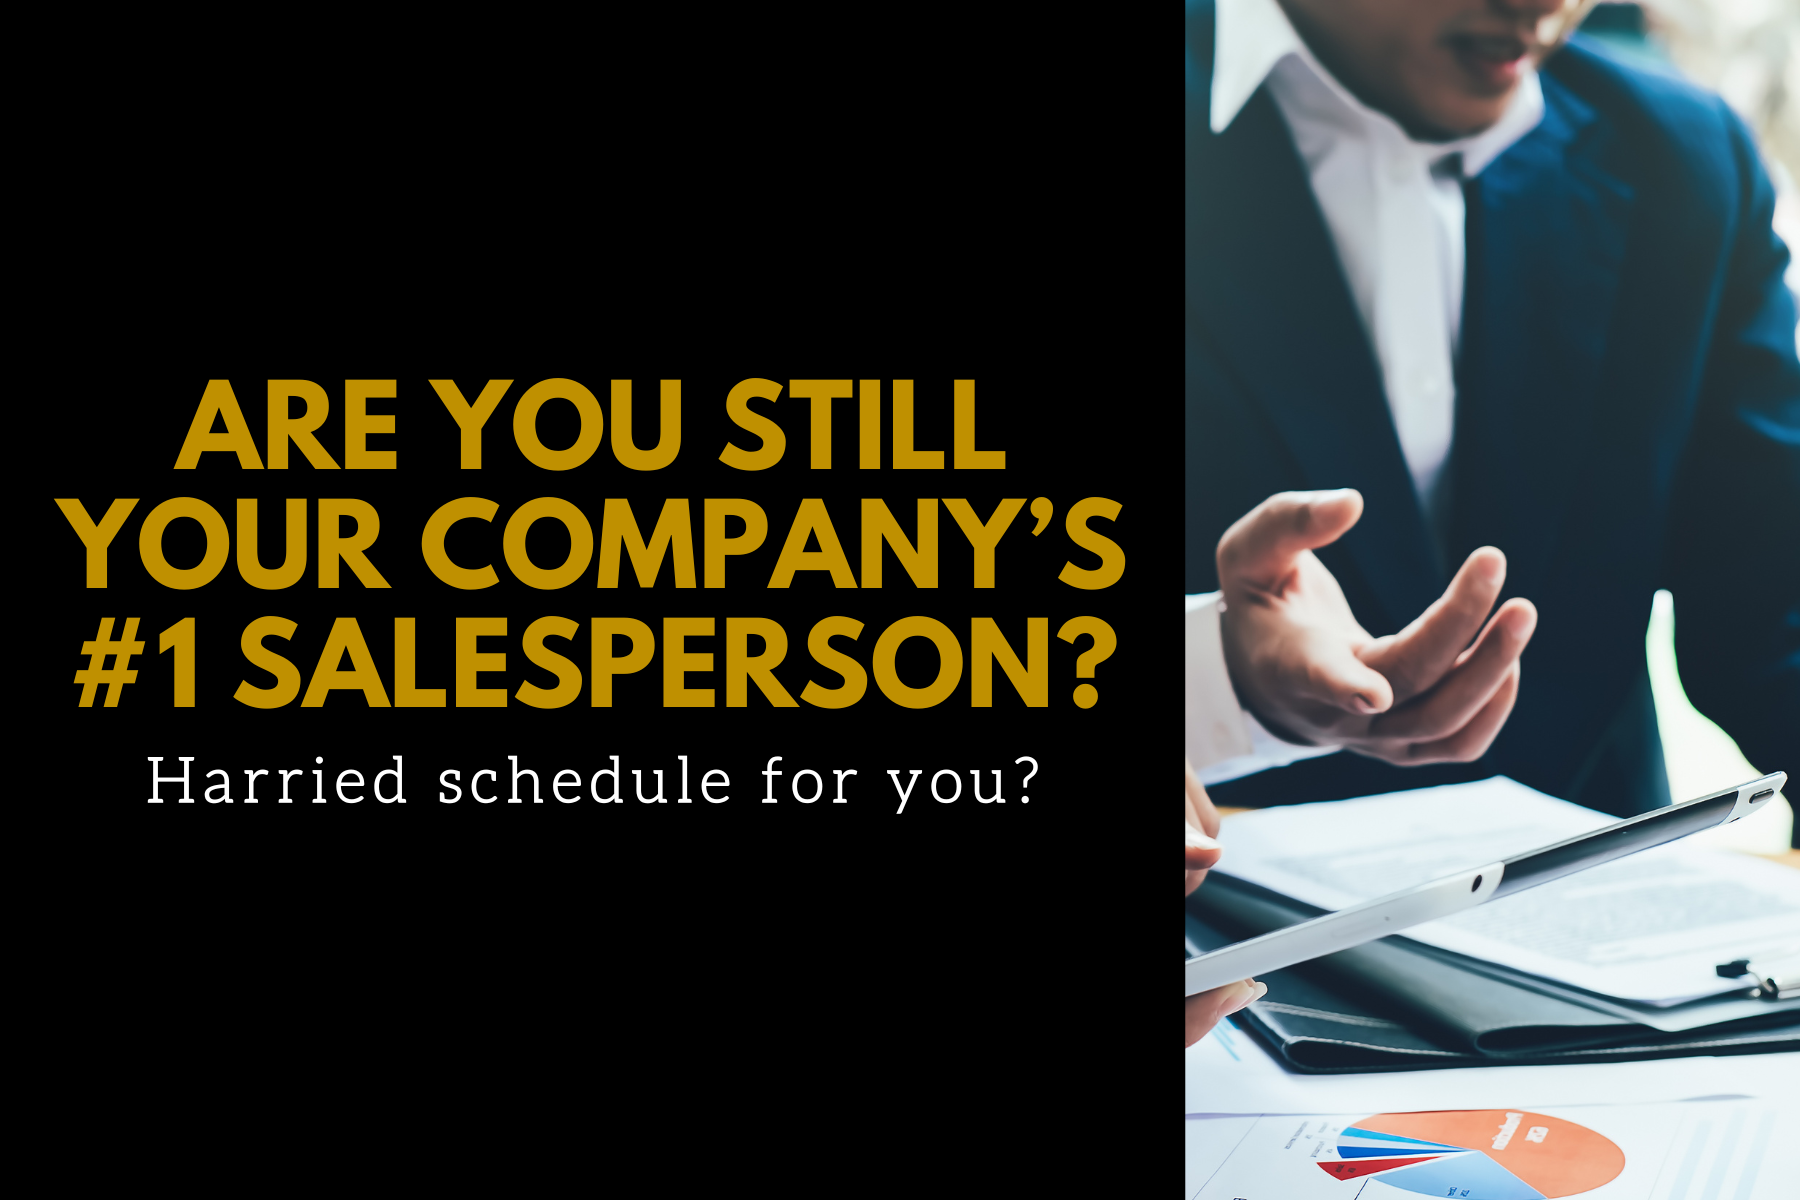 Are you still your company’s #1 salesperson? Harried schedule for you?